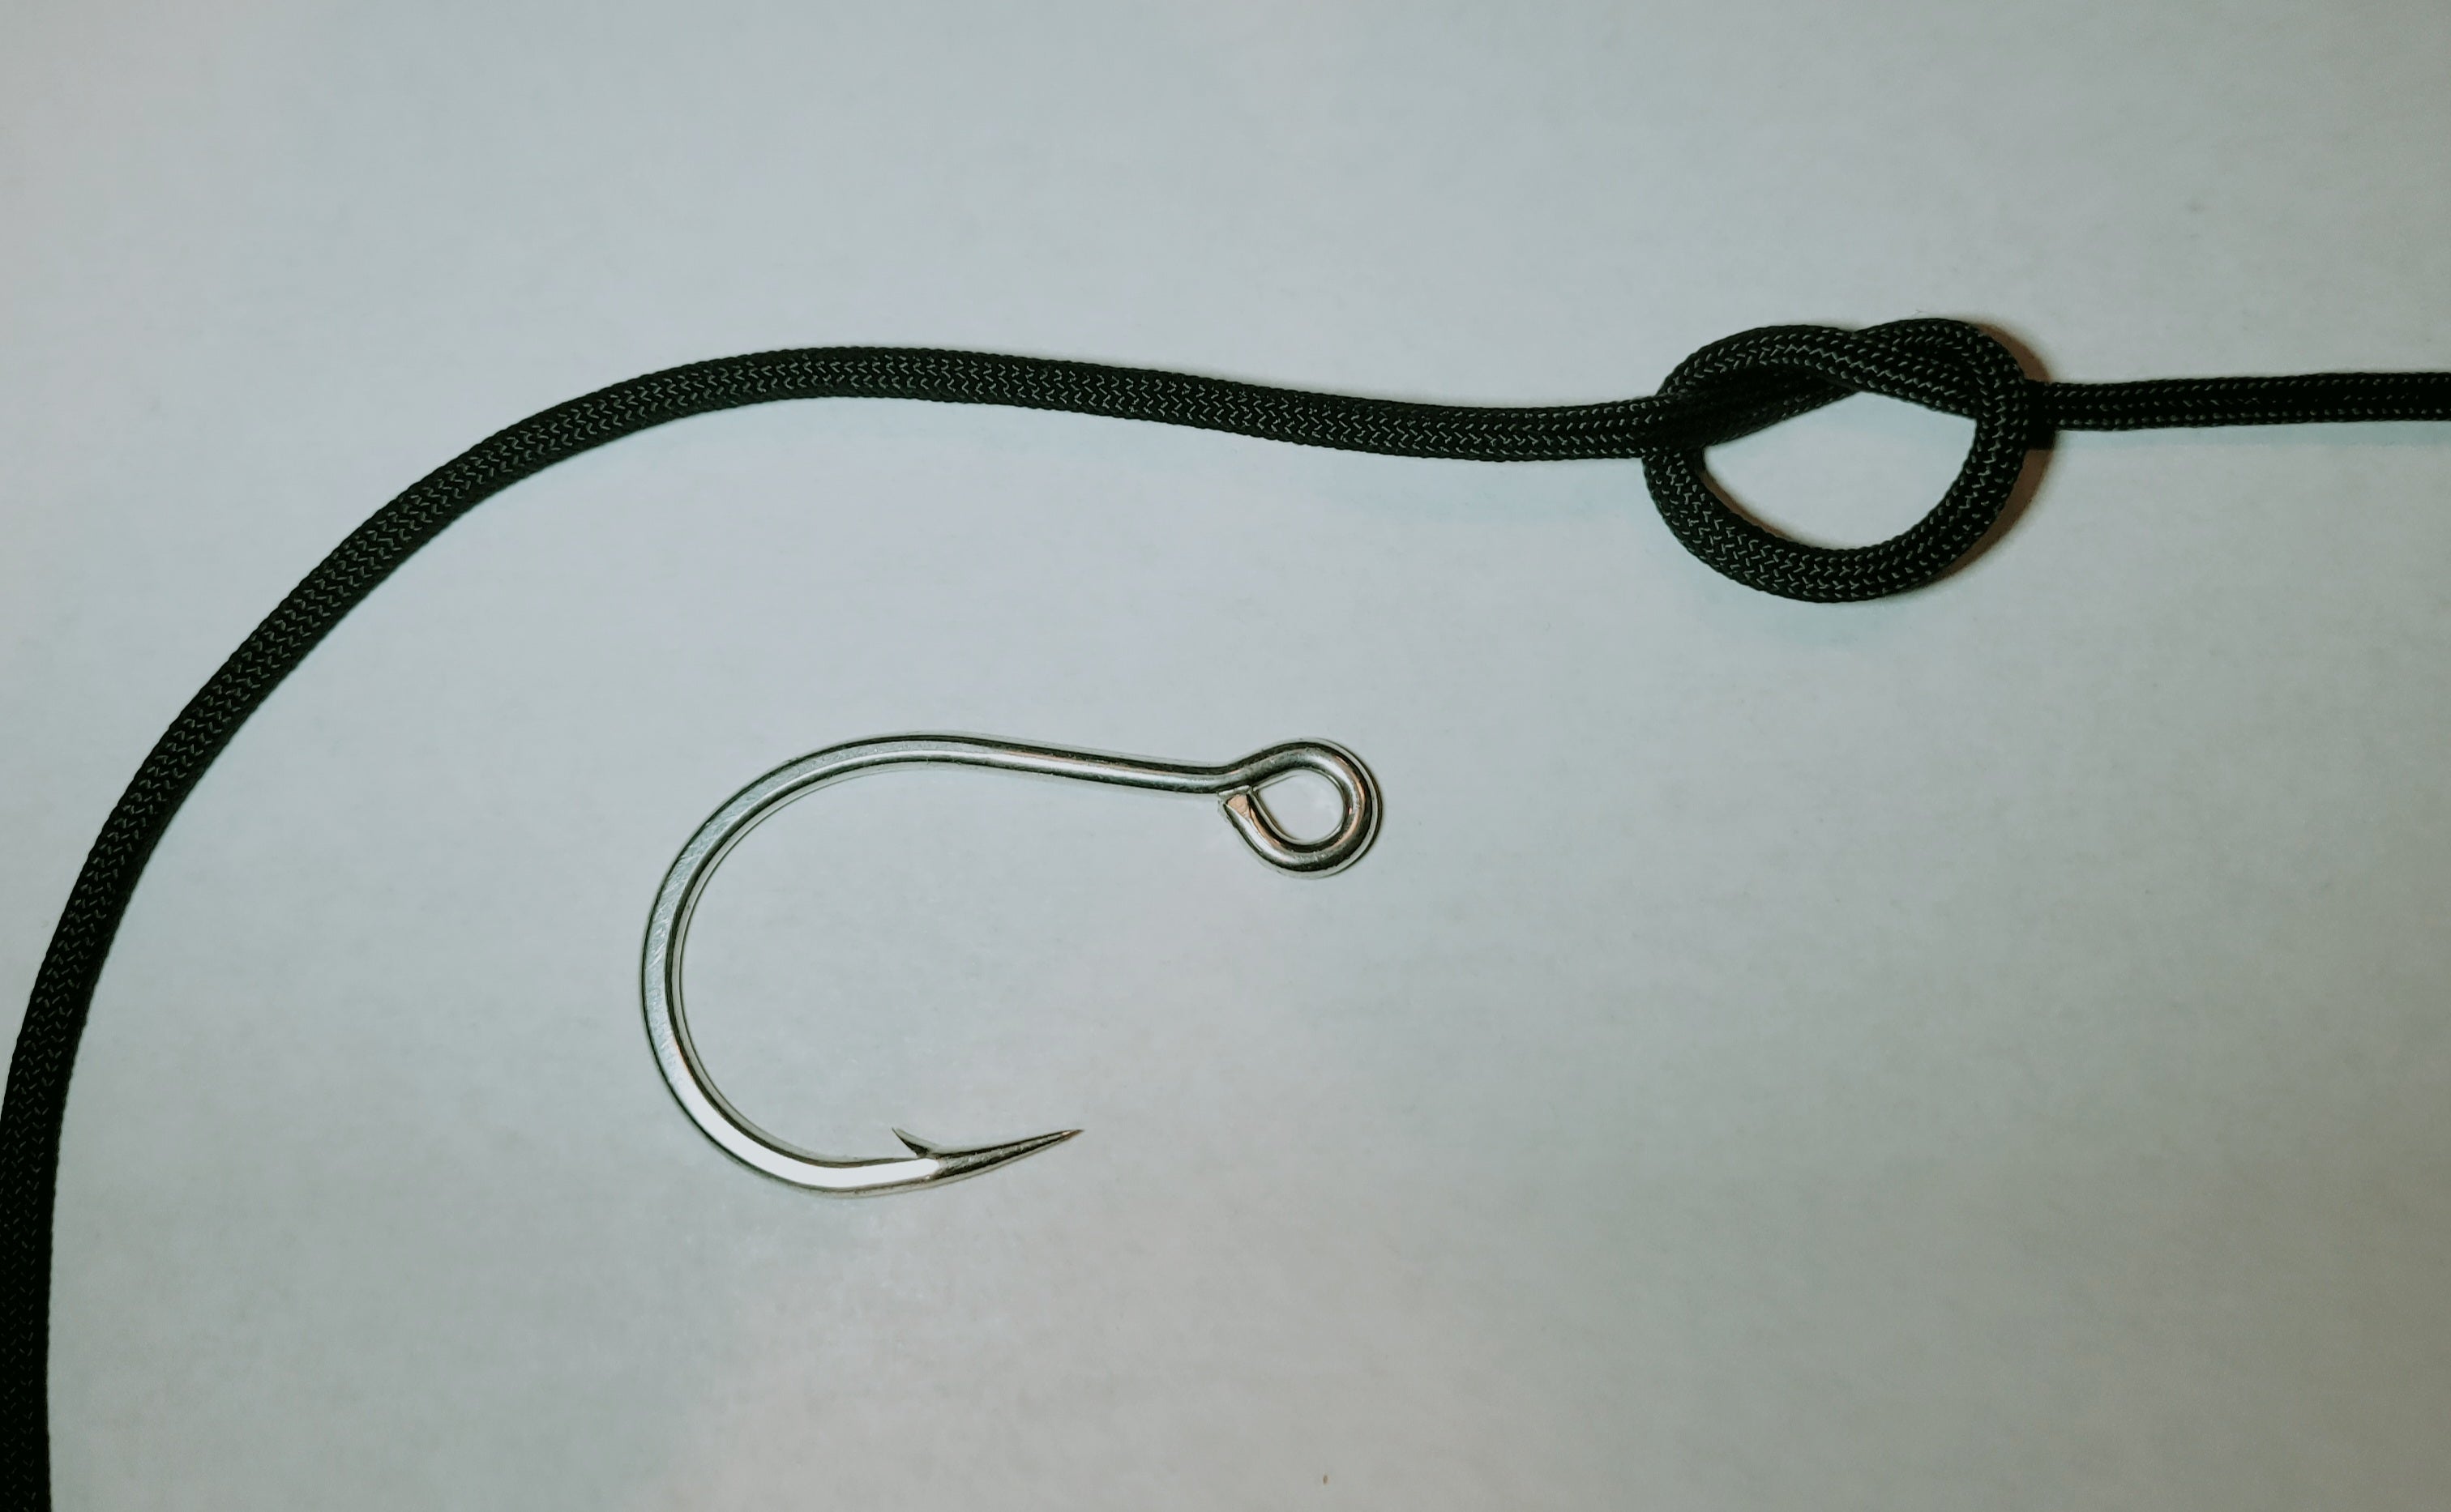 Are You Nuts? Know your Fishing Knots! – The Non-Slip Loop Knot